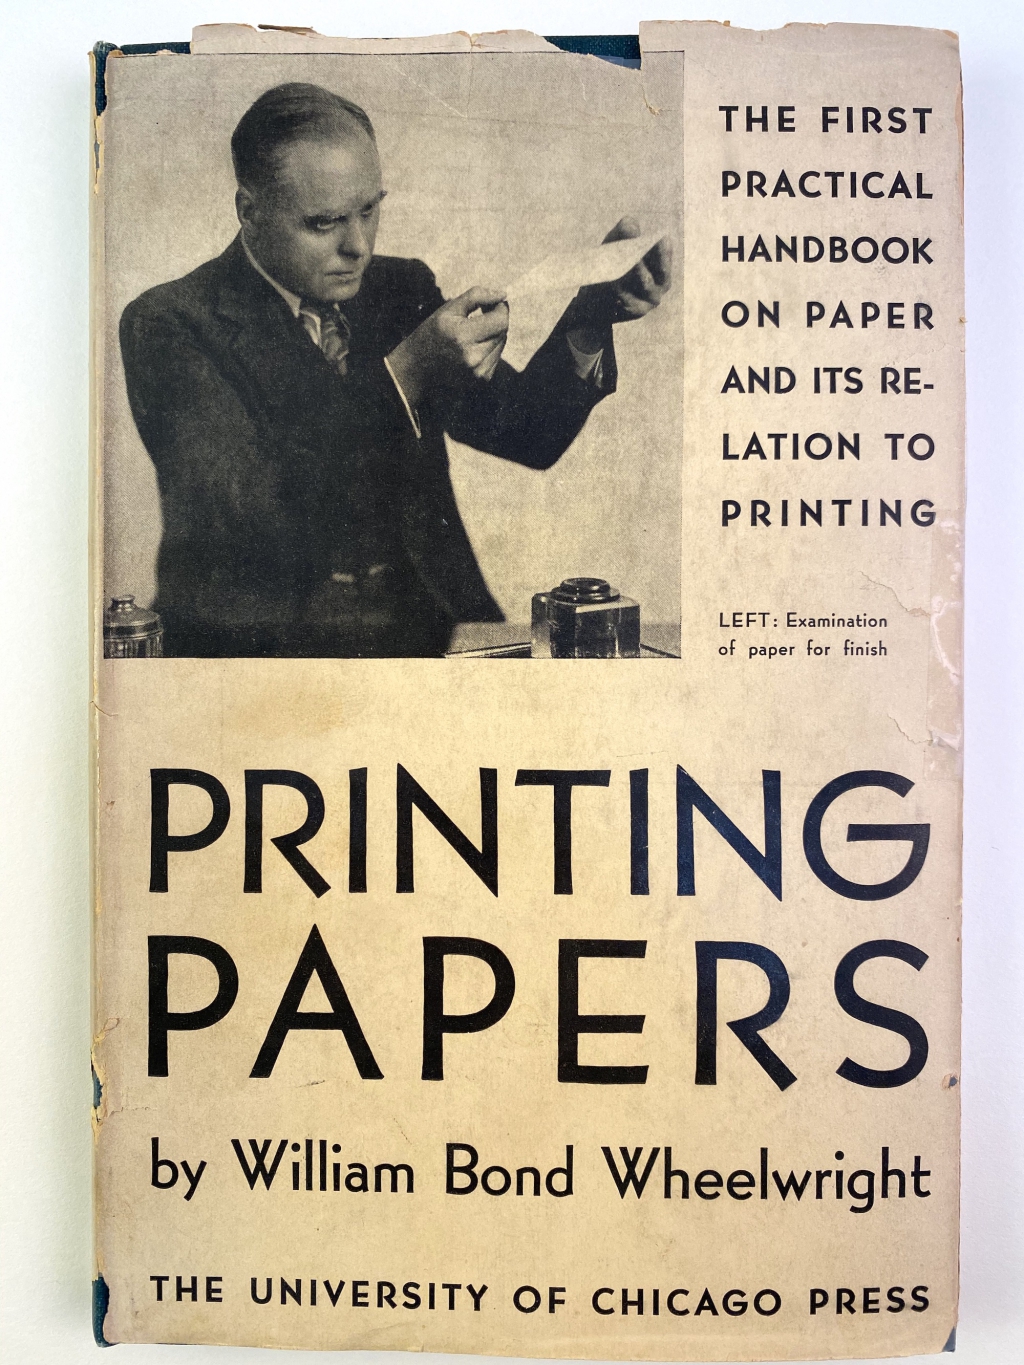 Wheelwright, Printing Papers dust jacket